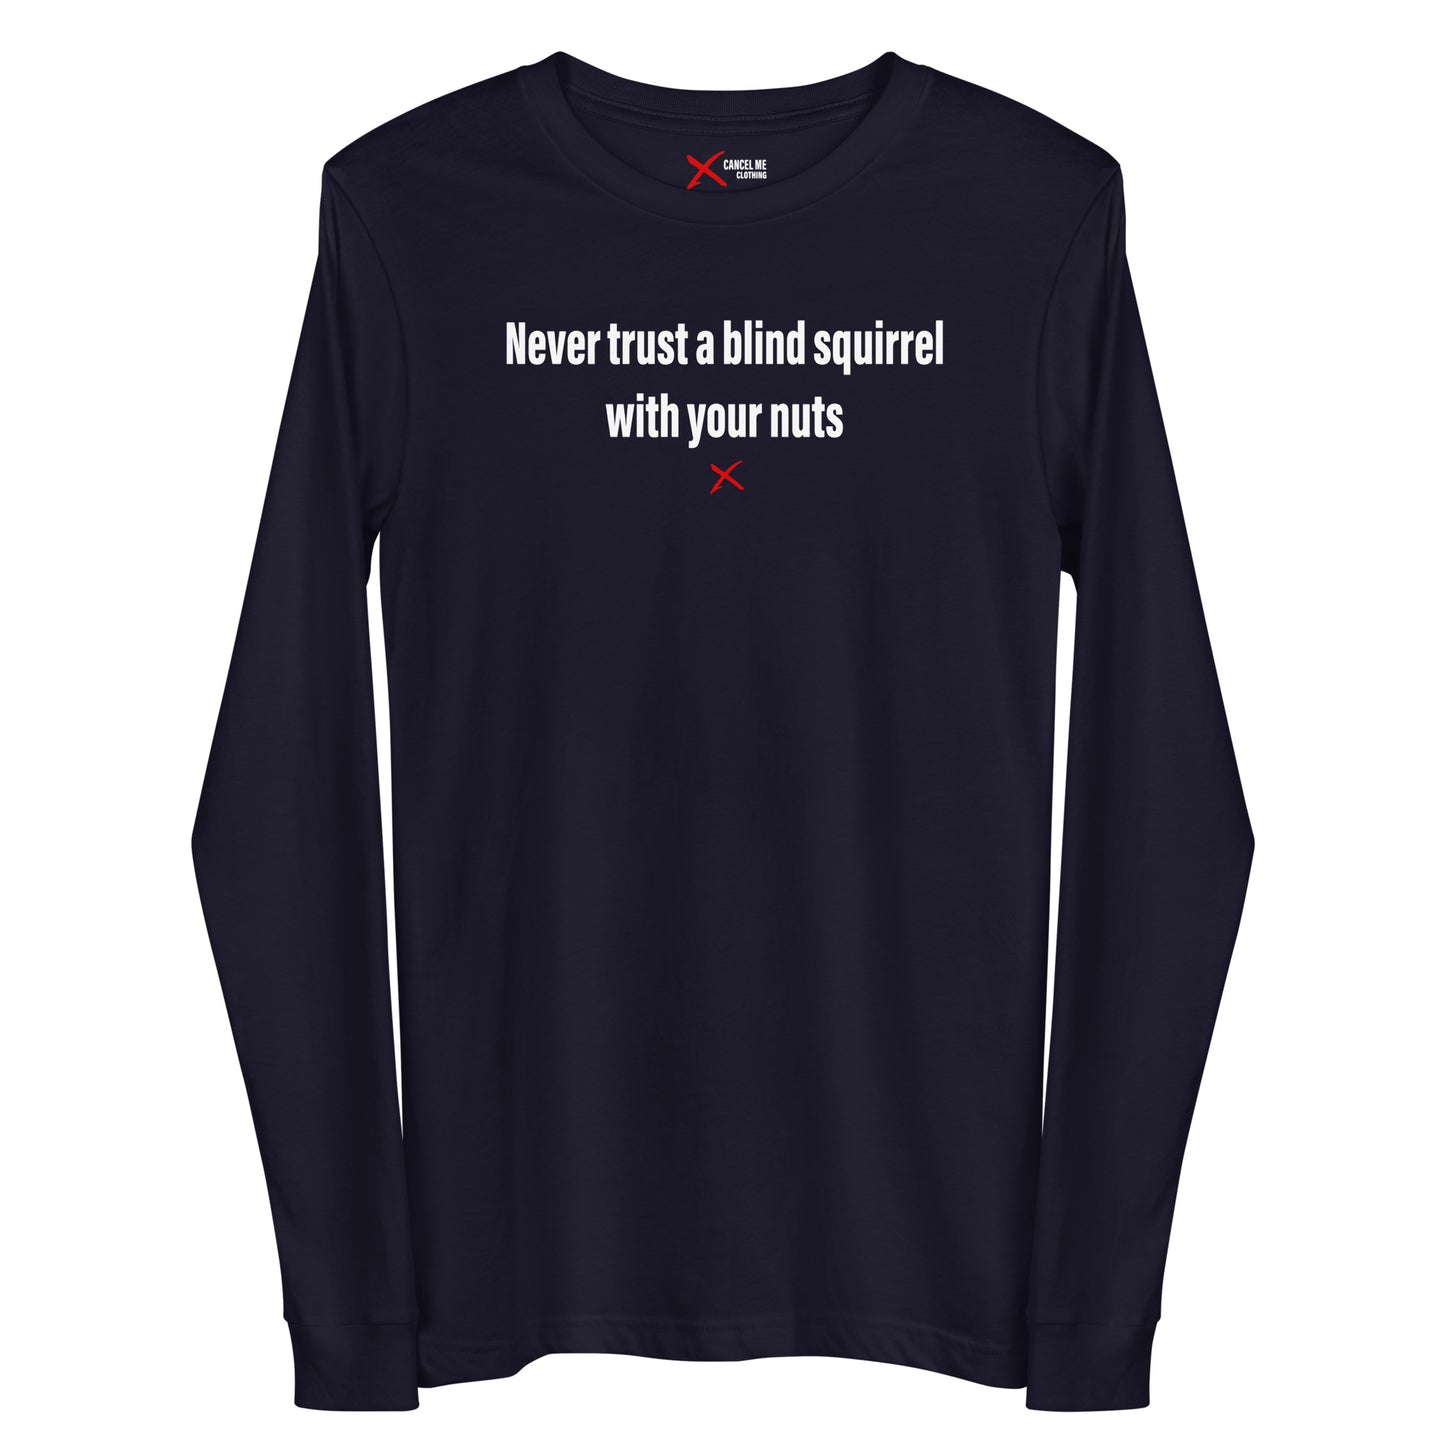 Never trust a blind squirrel with your nuts - Longsleeve